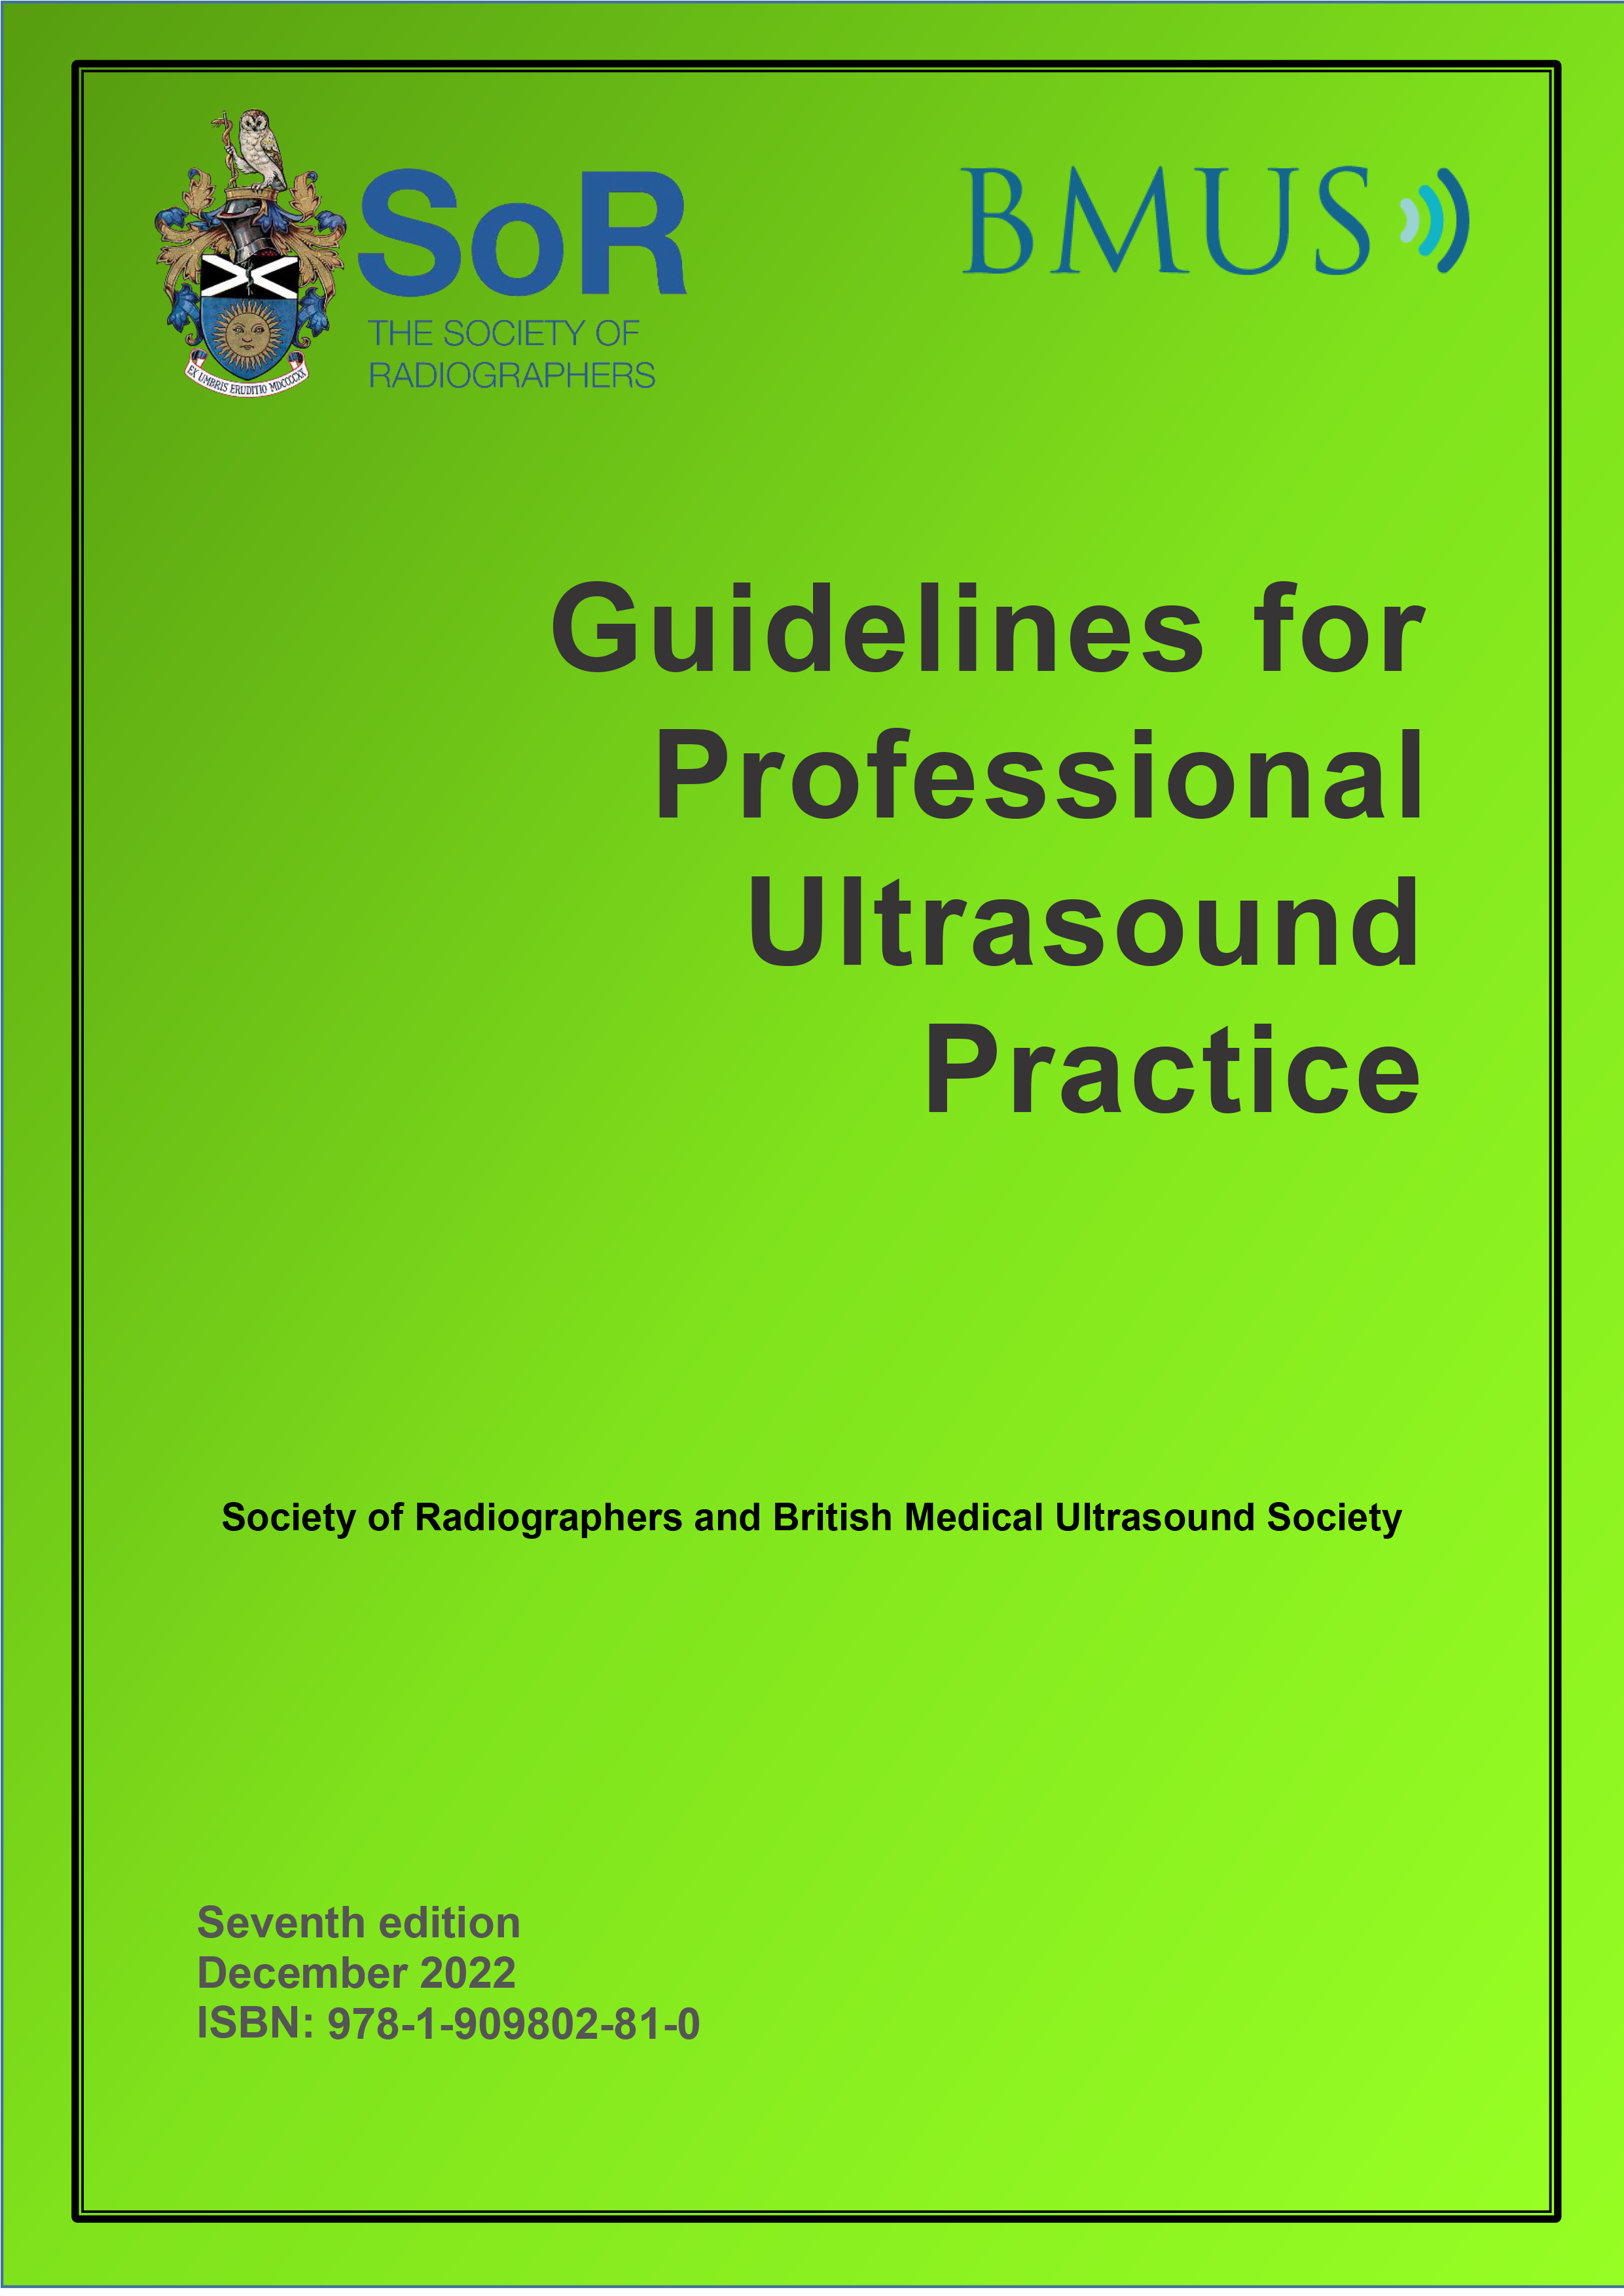 SoR and BMUS Guidelines for Professional Ultrasound Practice